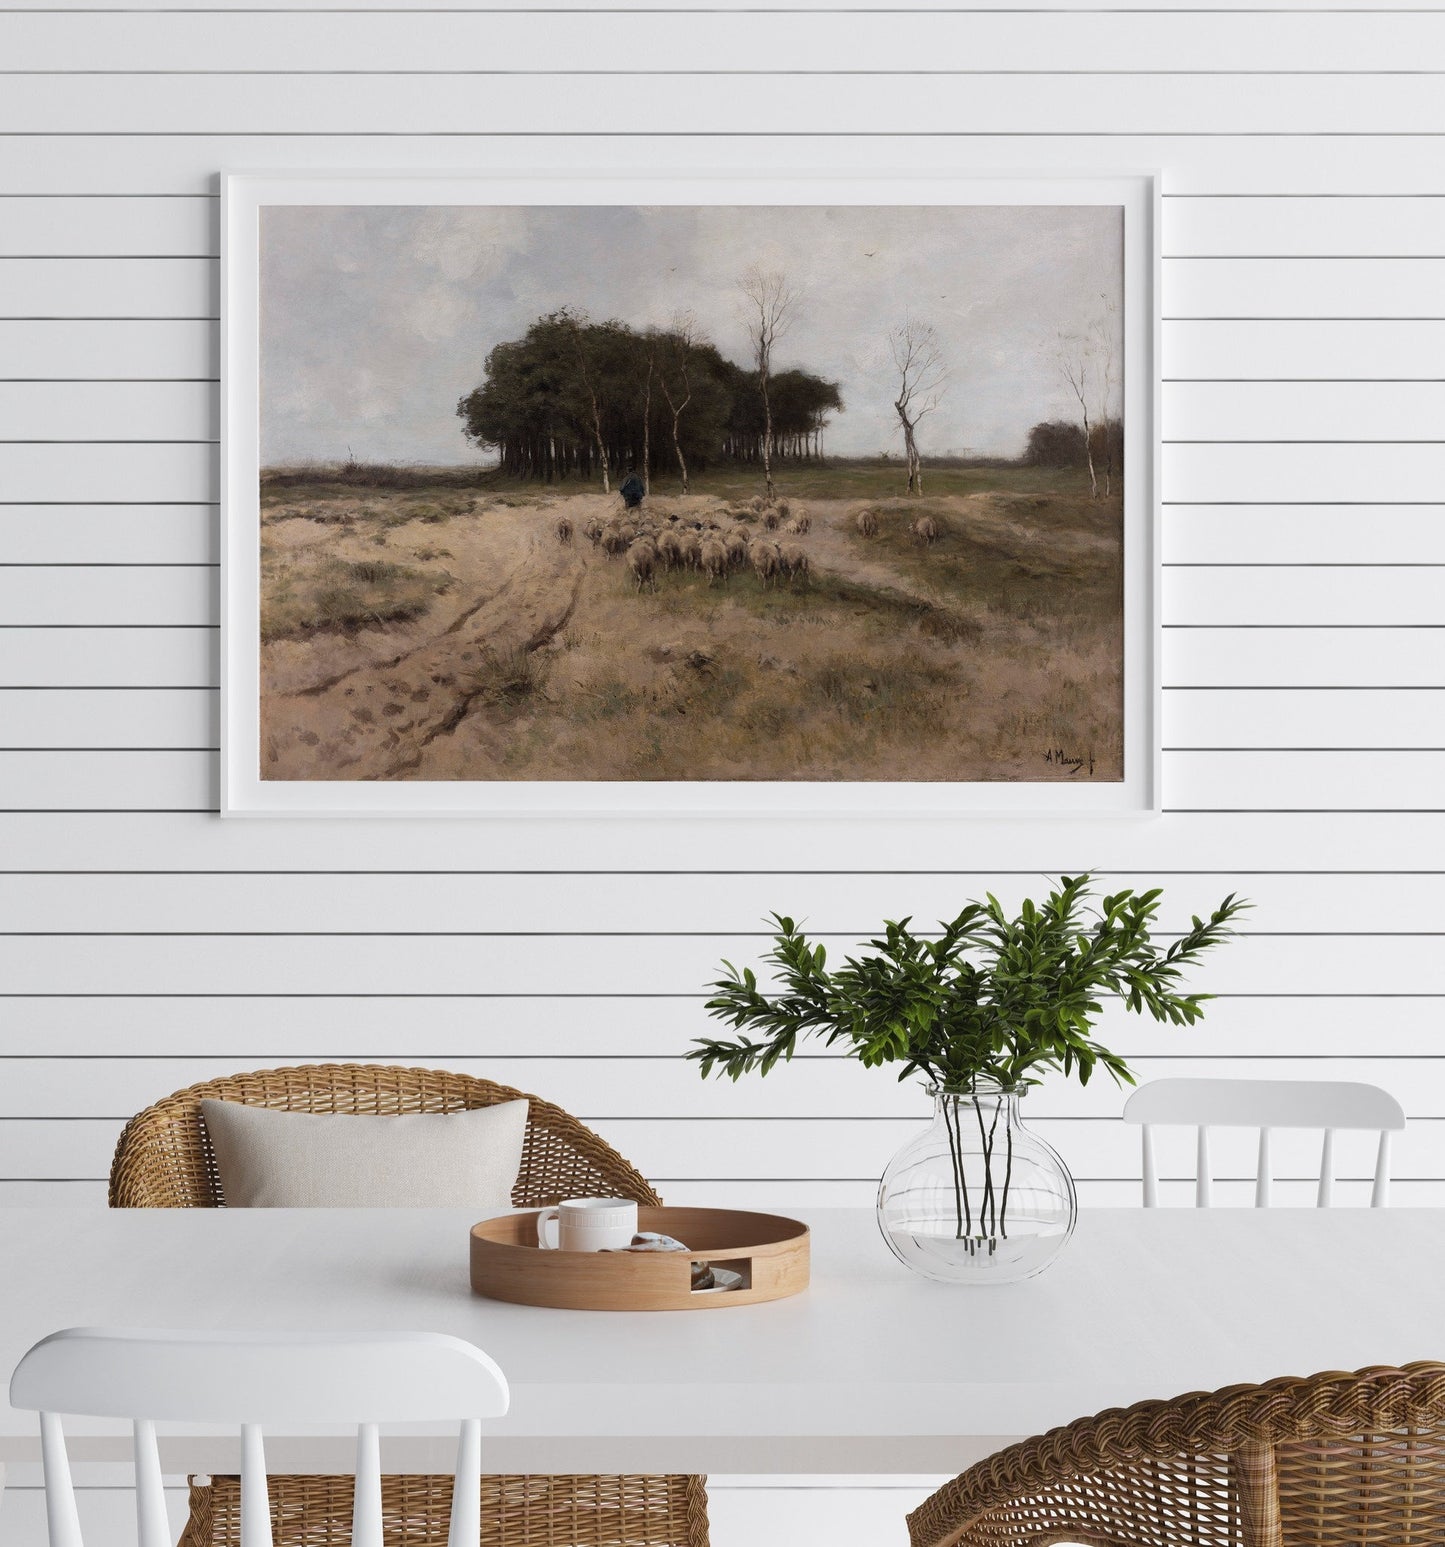 Vintage Farm with Sheep Wall Art - Digital Oil Painting - Vintage poster print - Fine art print - Printed and Shipped to you